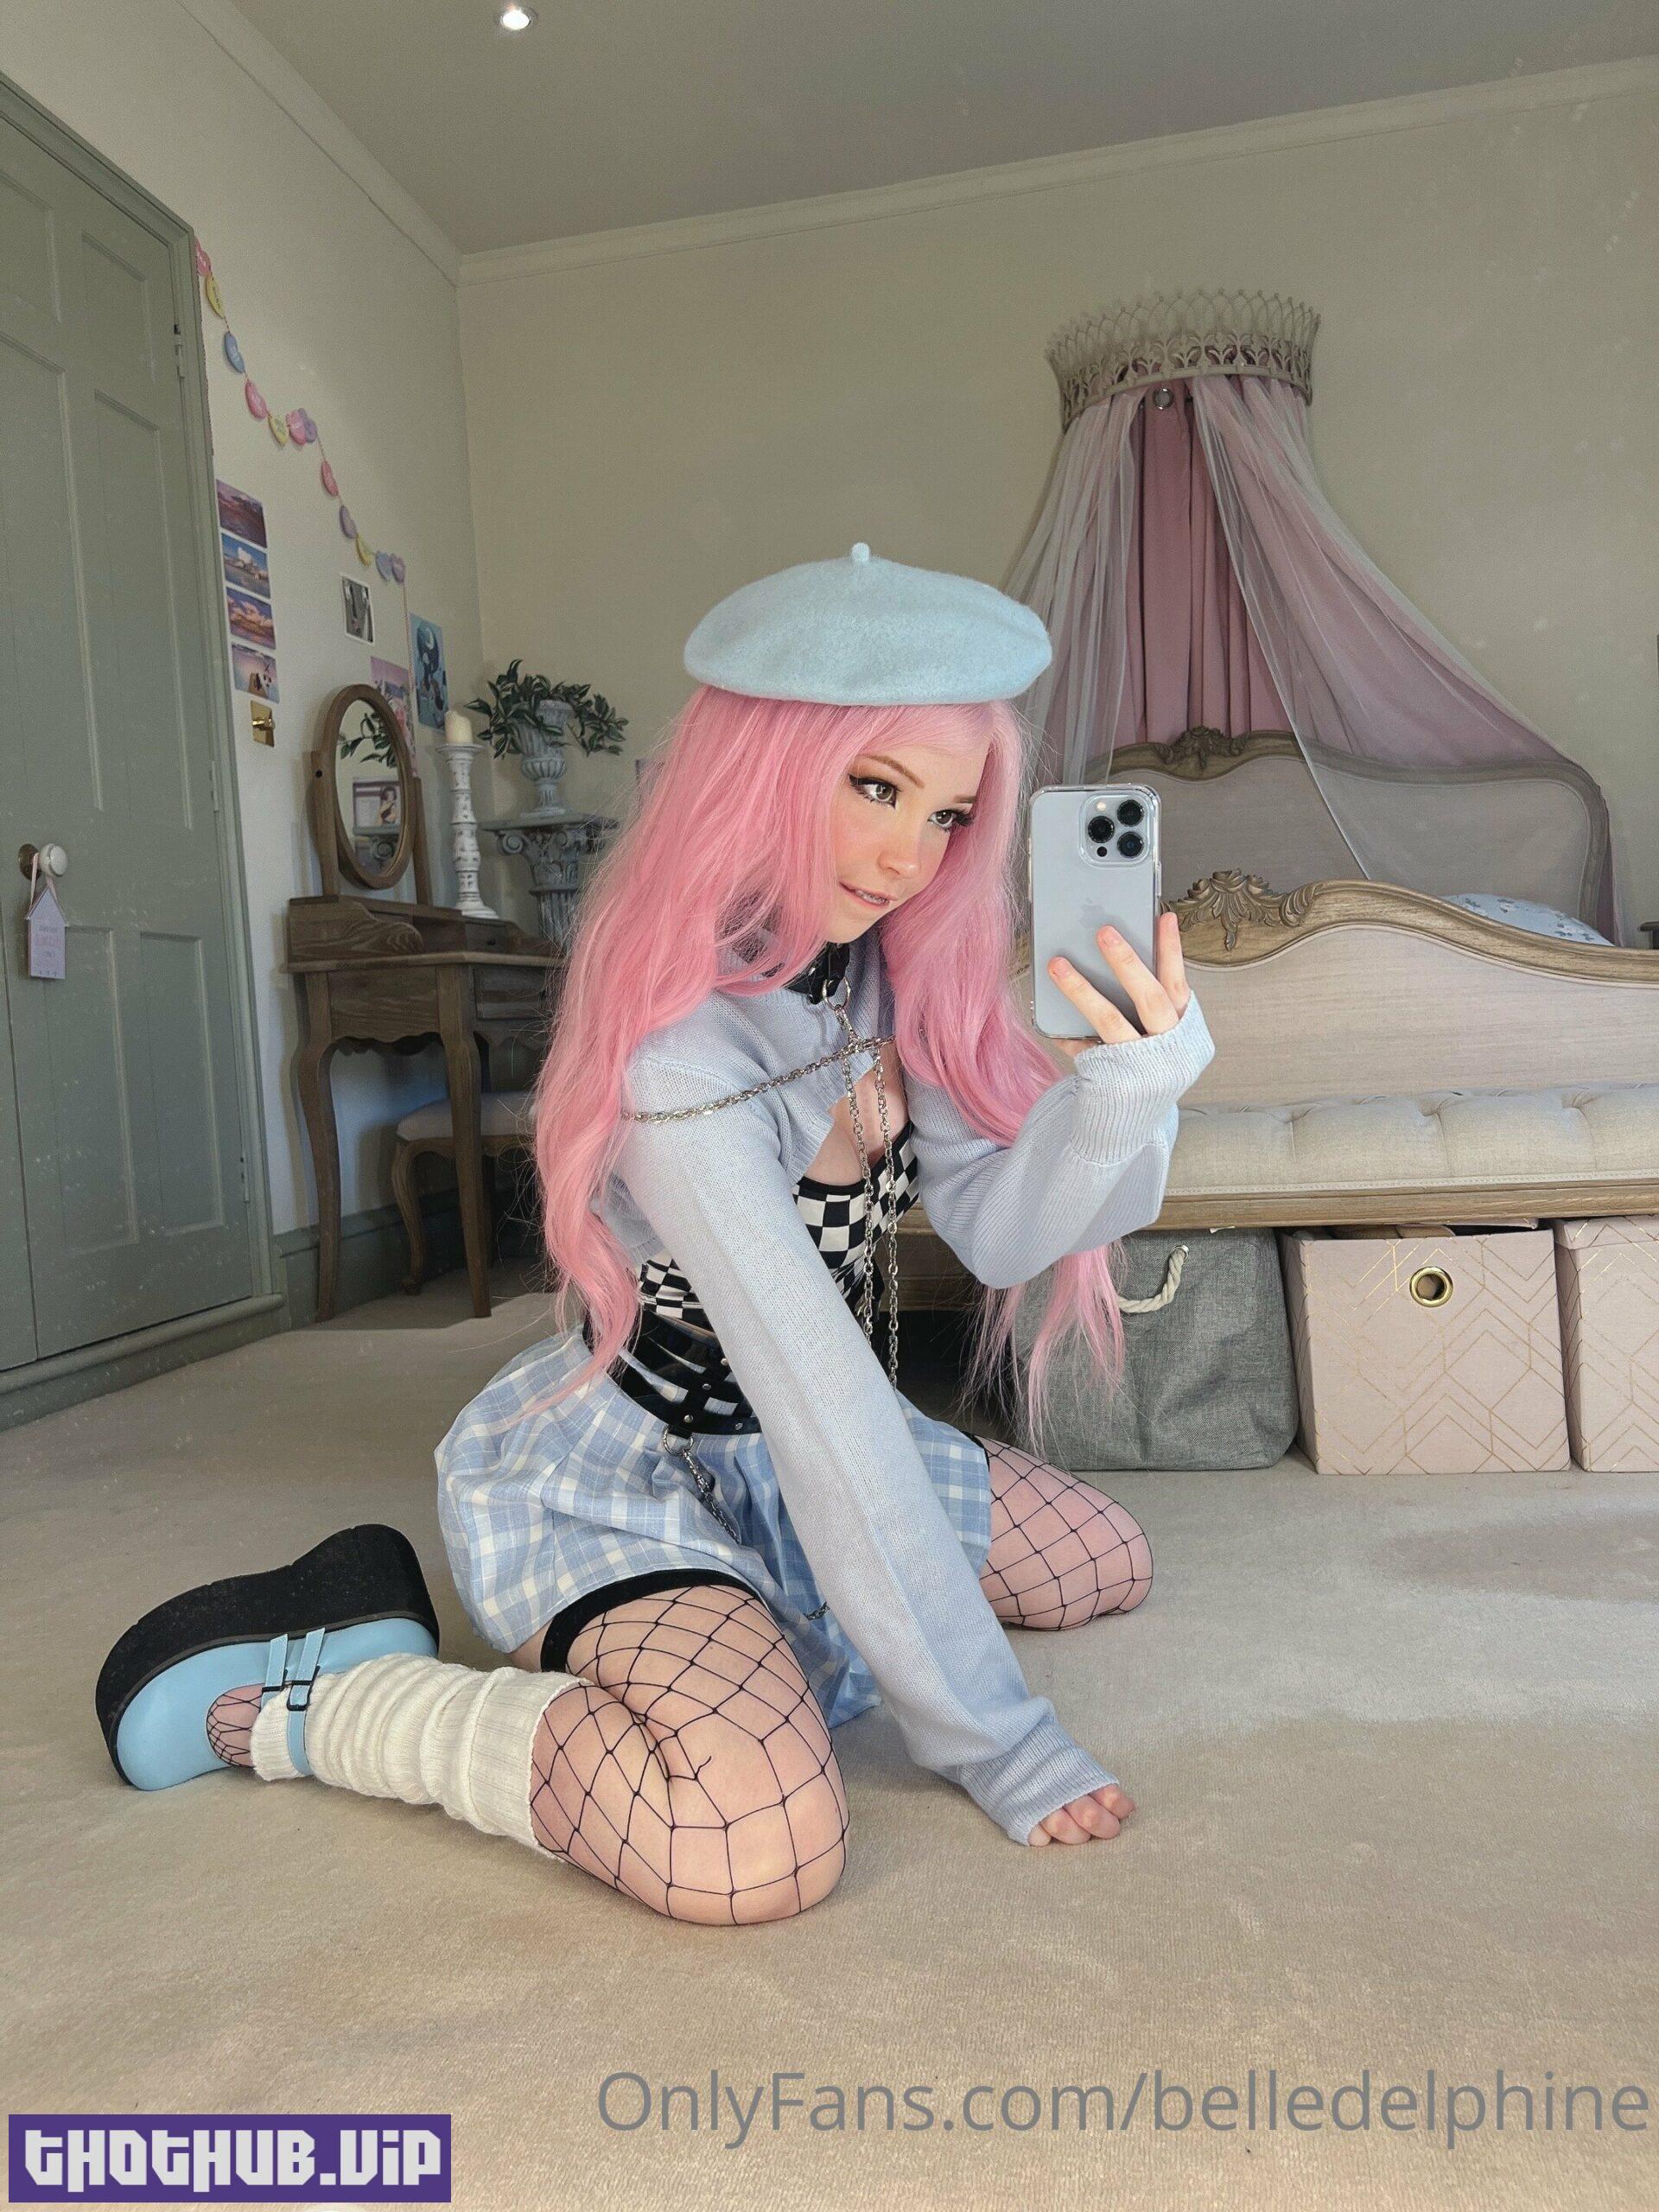 1667578777 823 Top Hot Belle Delphine Nude Cafe Cosplay Porn 2022